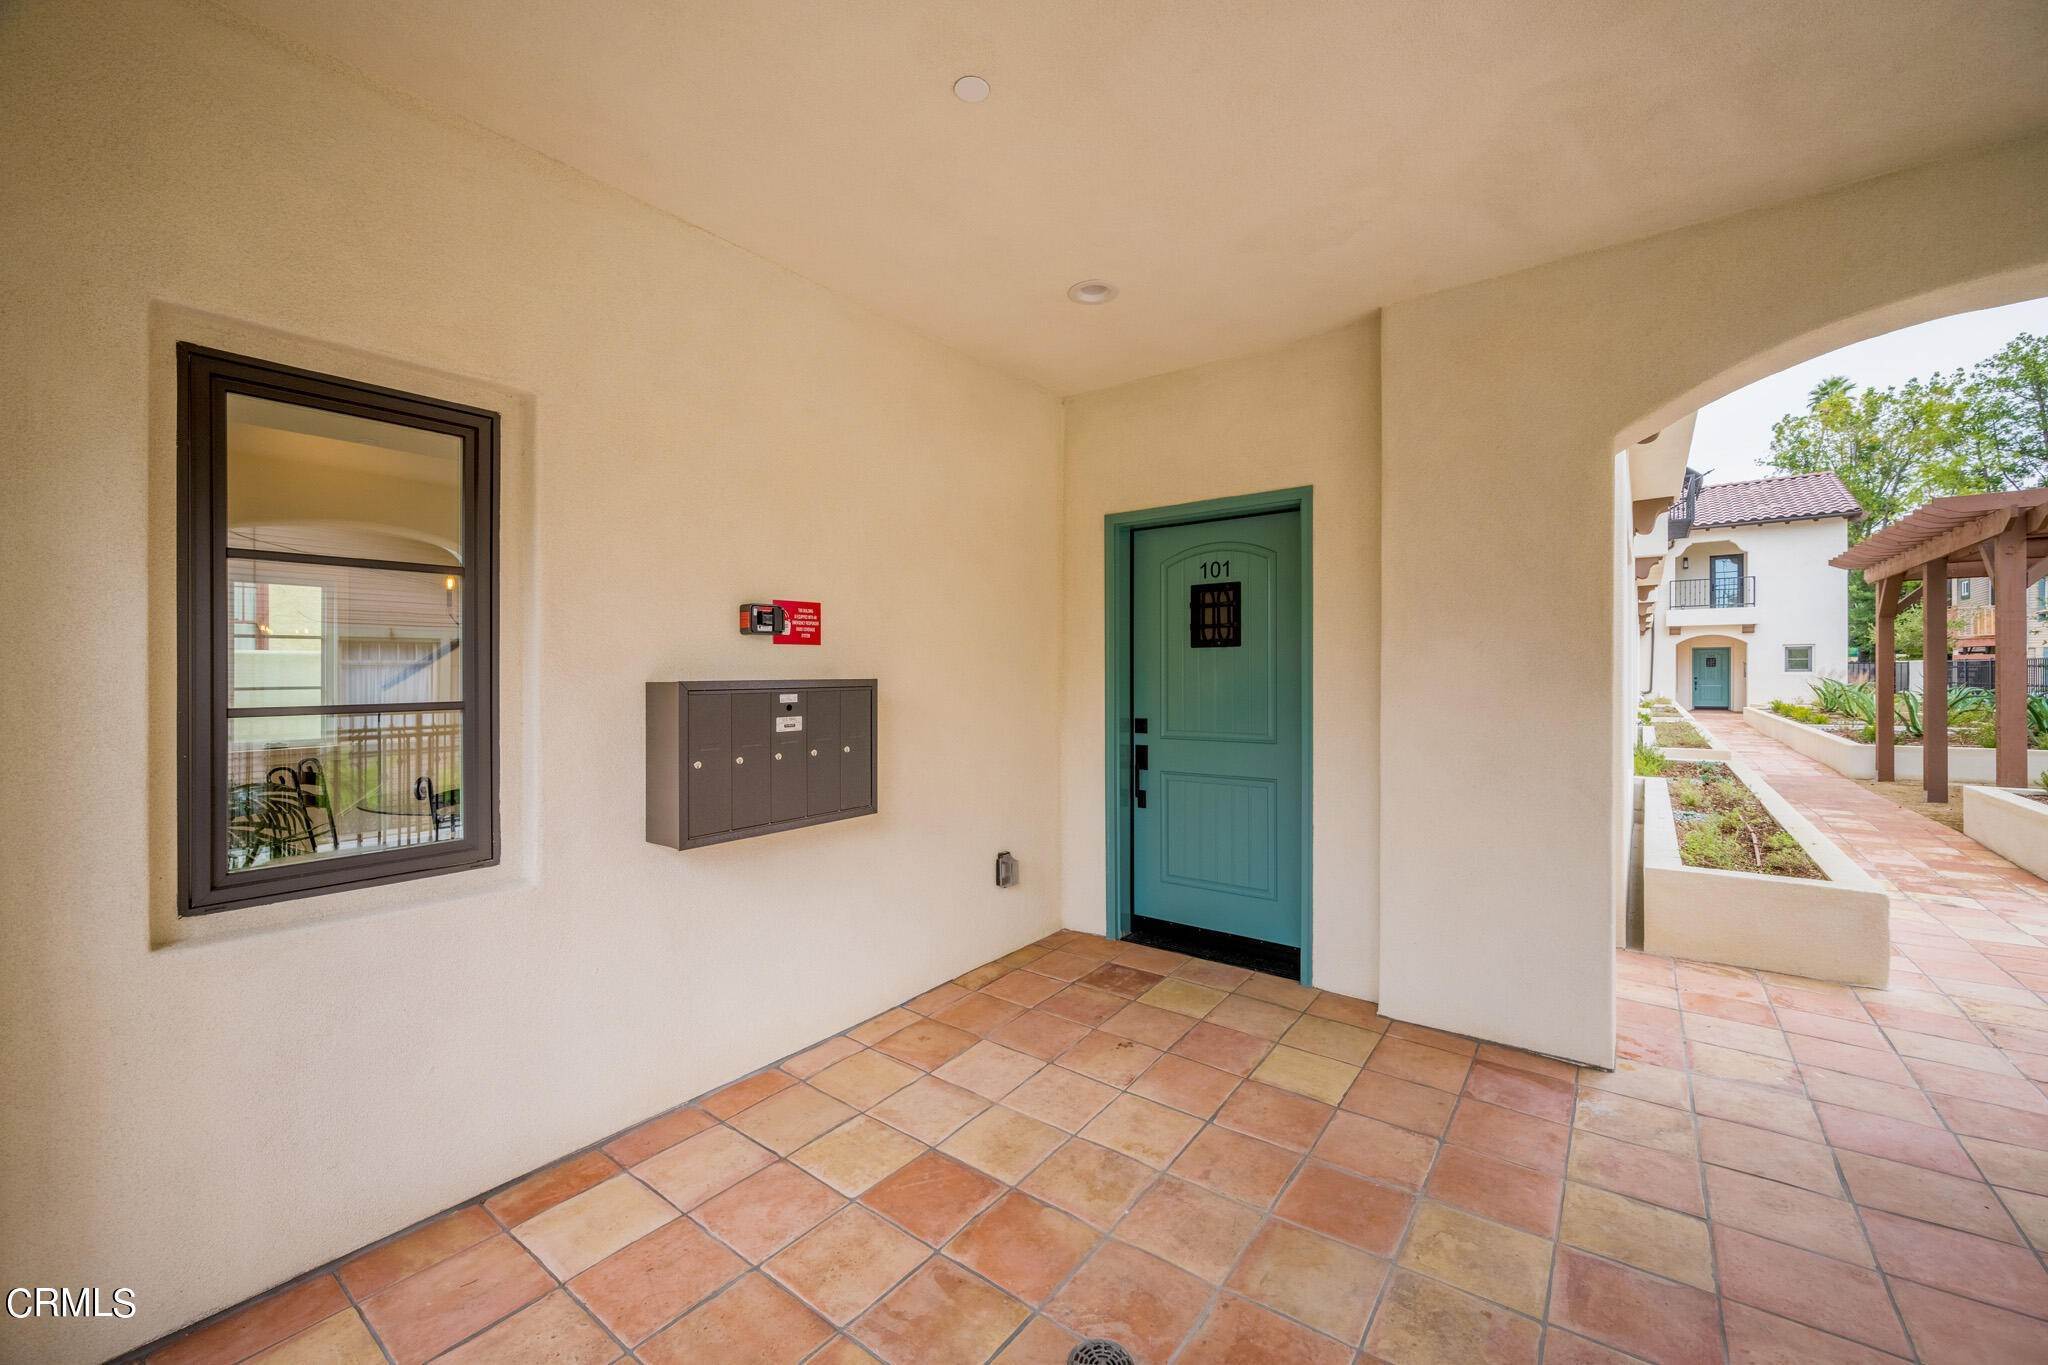 11. townhouses for Sale at 262 North Wilson 101 #101 262 North Wilson 101 Pasadena, California 91106 United States